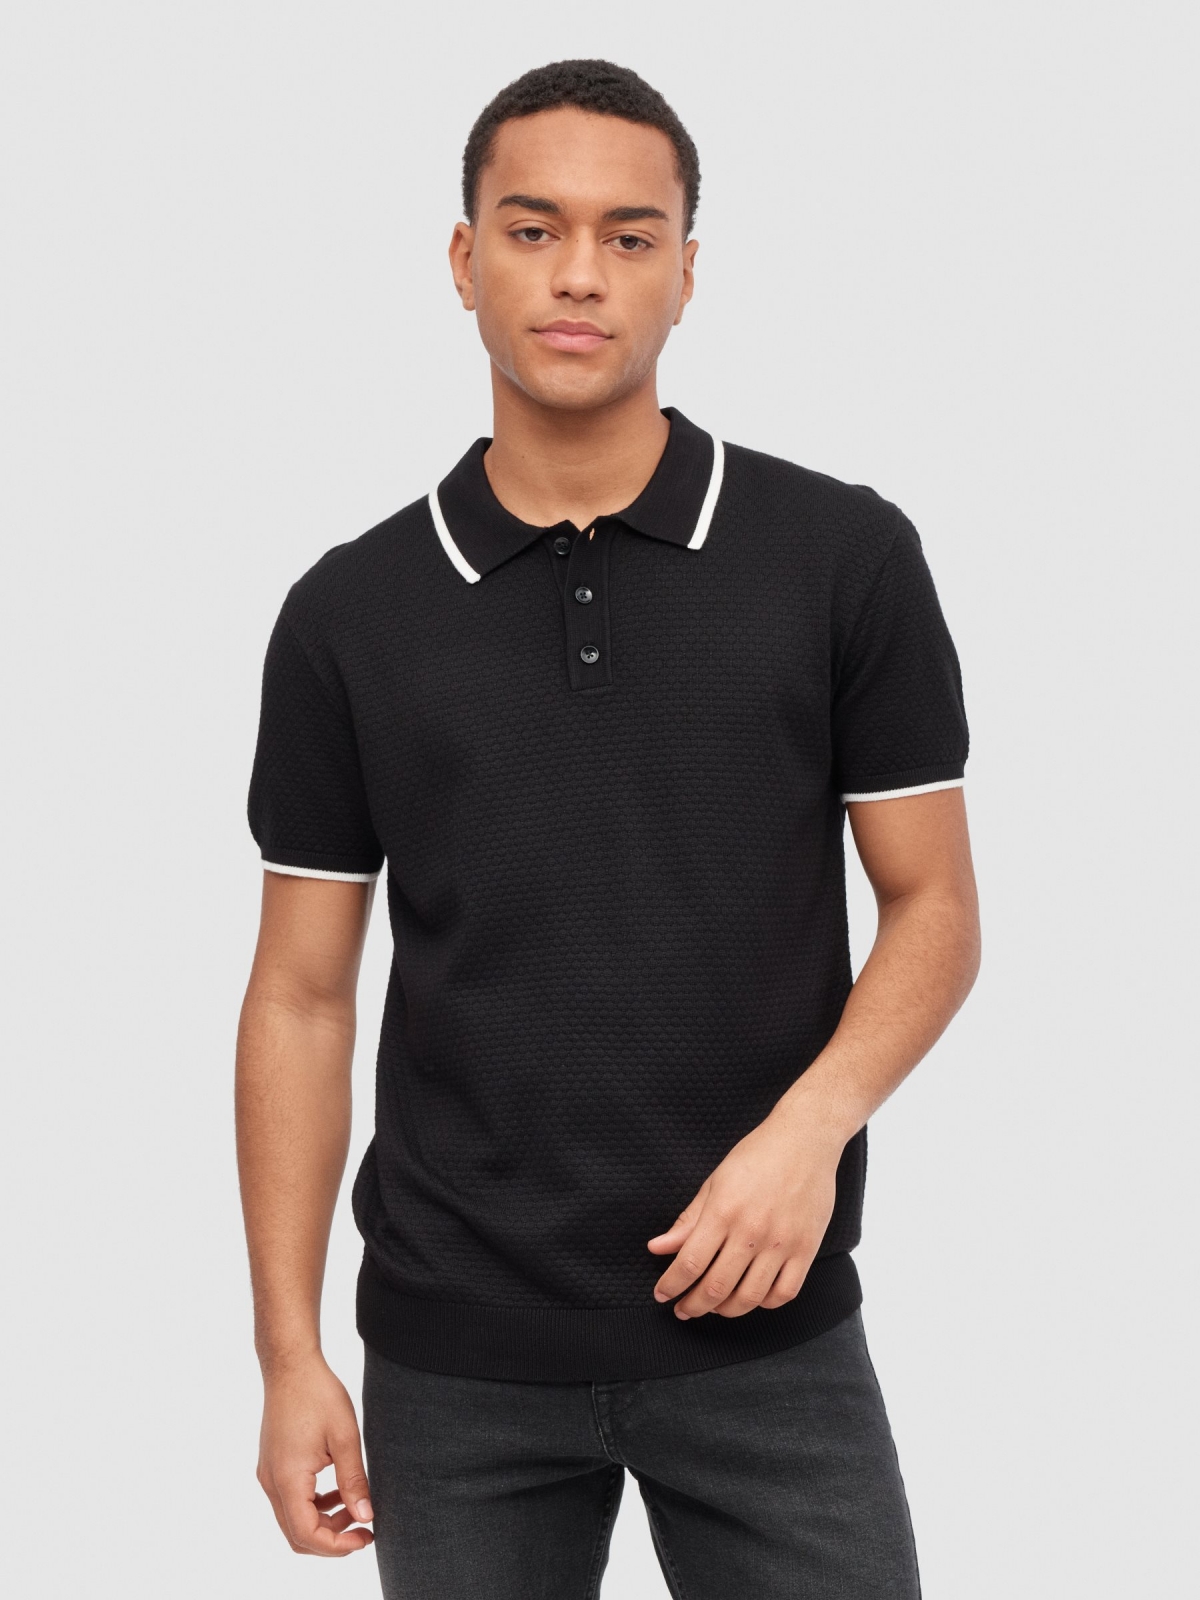 Knitted polo shirt black middle front view